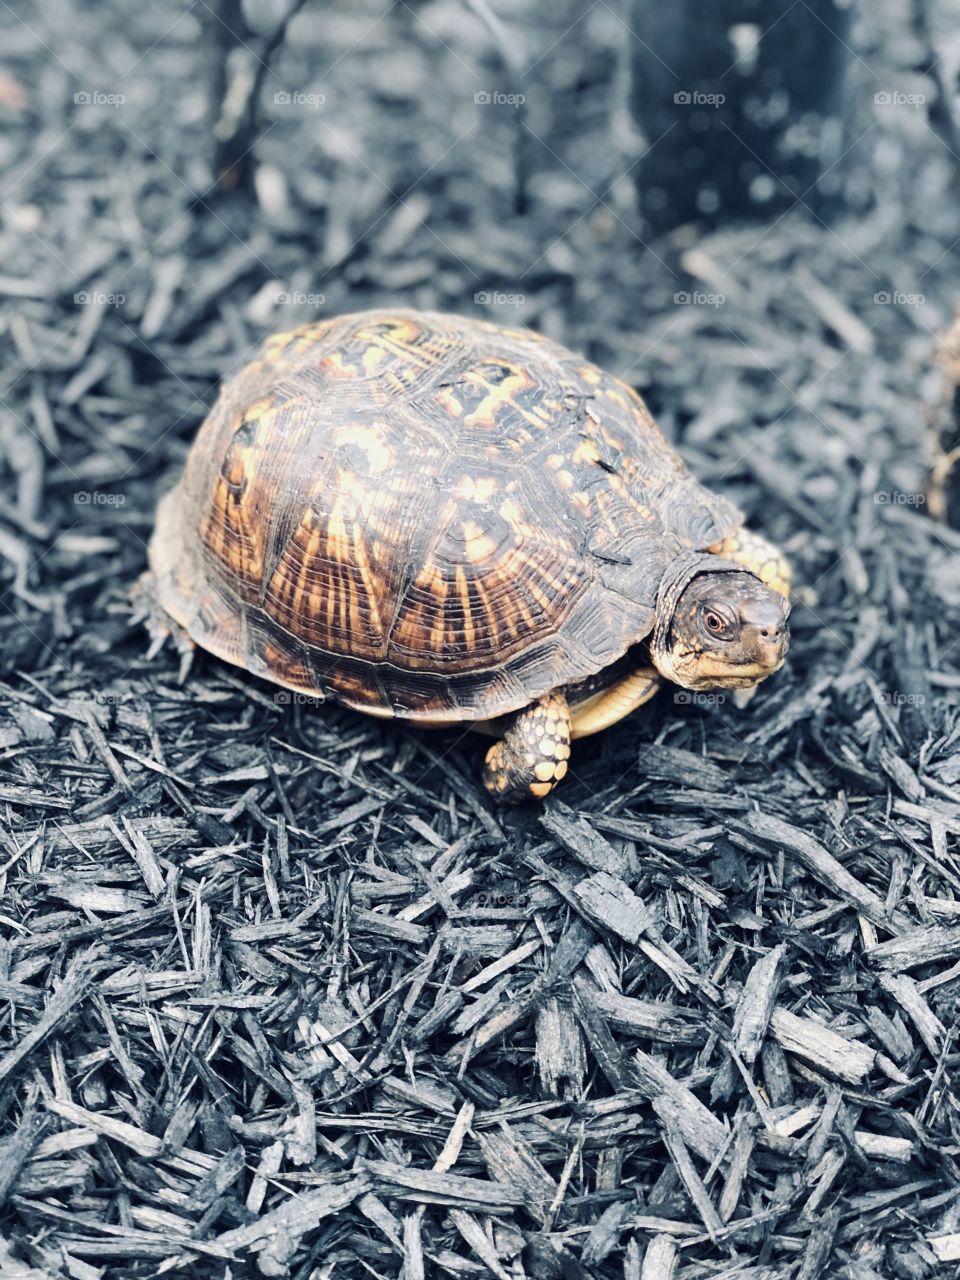 Little turtle chilling in the mulch